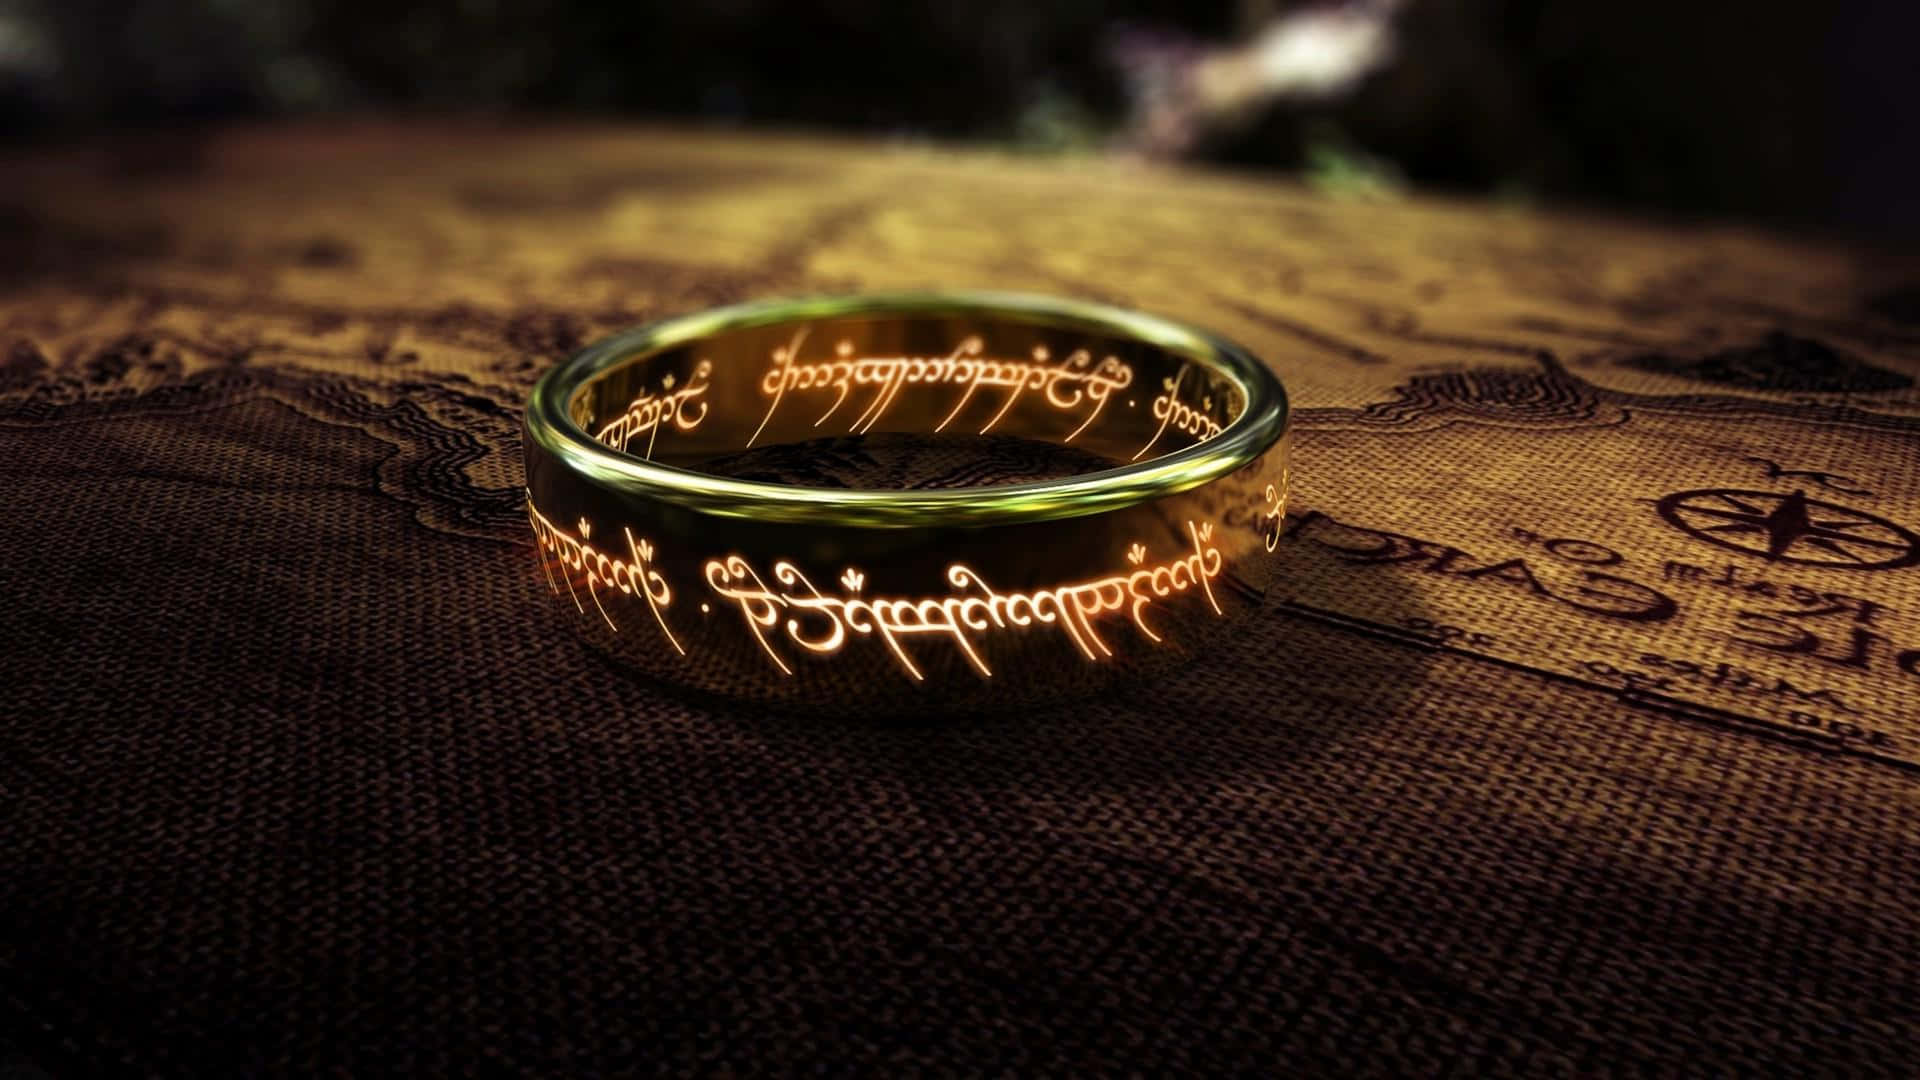 Stunning Middle-earth Landscape with The One Ring Inscription